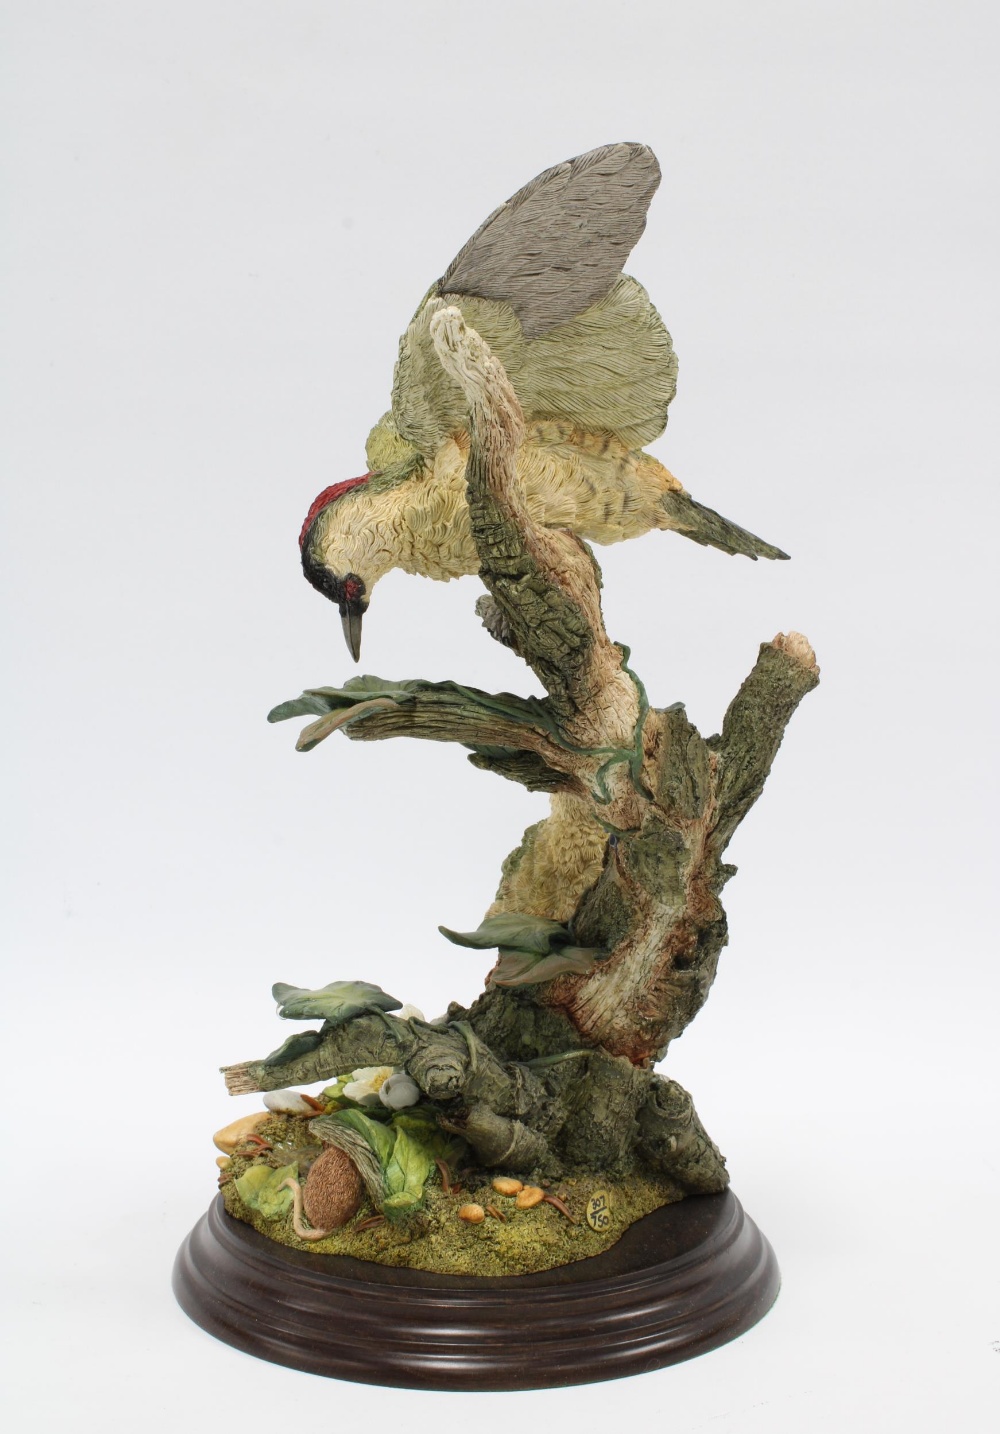 A limited edition Country Artists sculpture 'Shrewd Visitor', on wooden base, 29cm high - Image 2 of 2